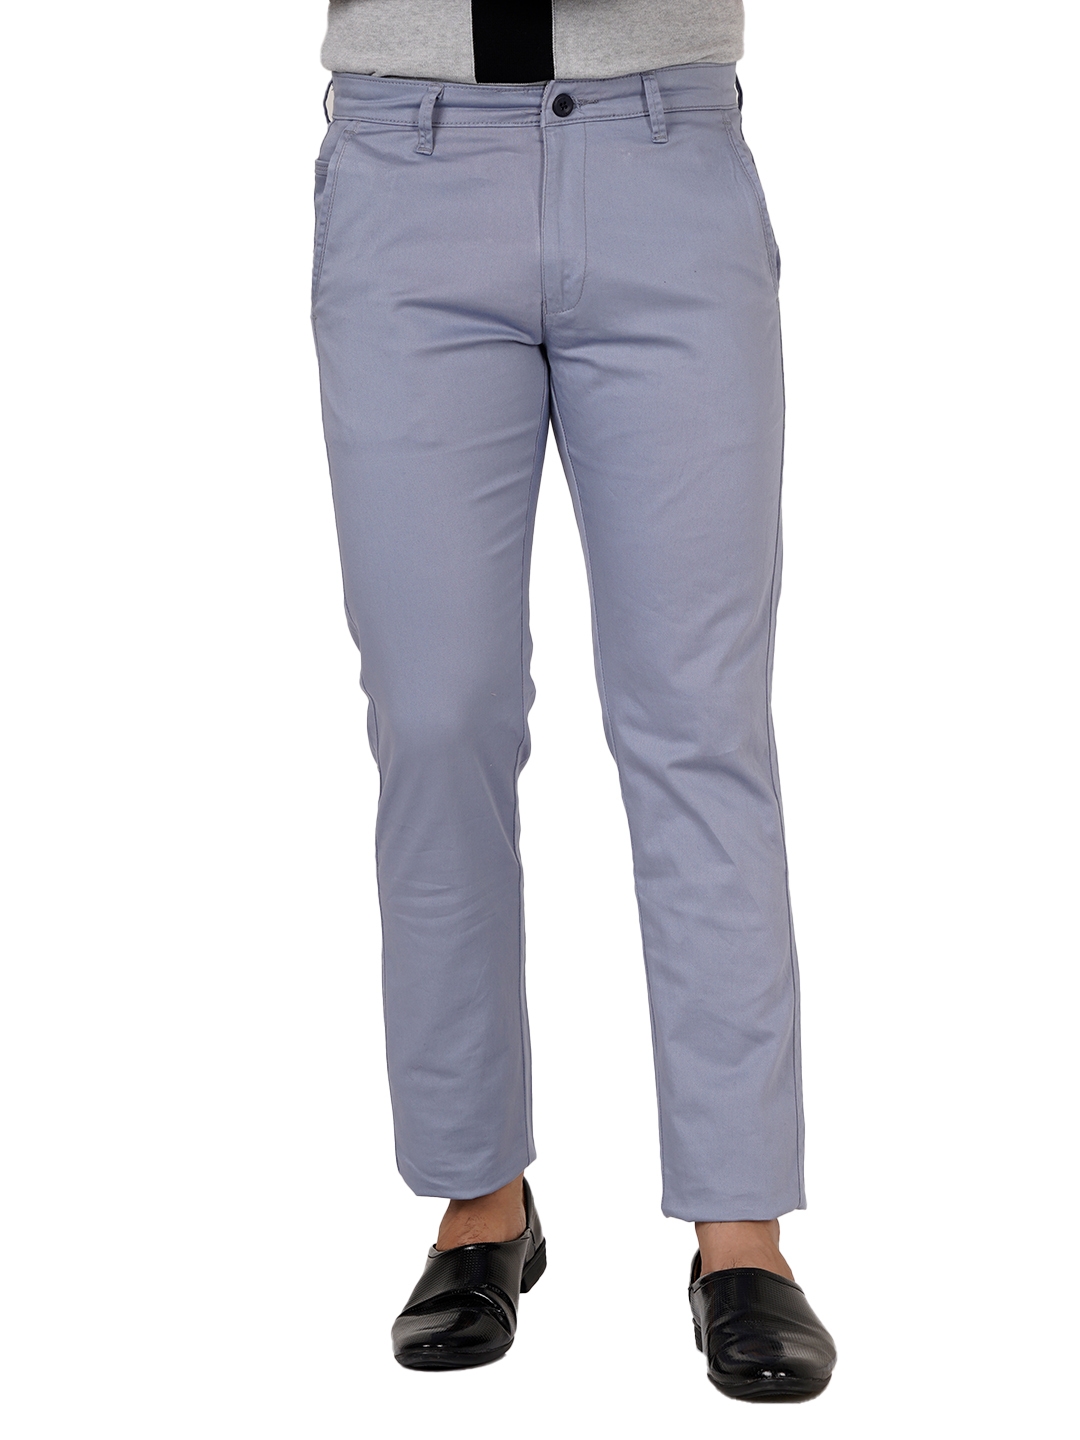 D'cot by Donear | D'cot by Donear Men's Blue Cotton Trousers 0